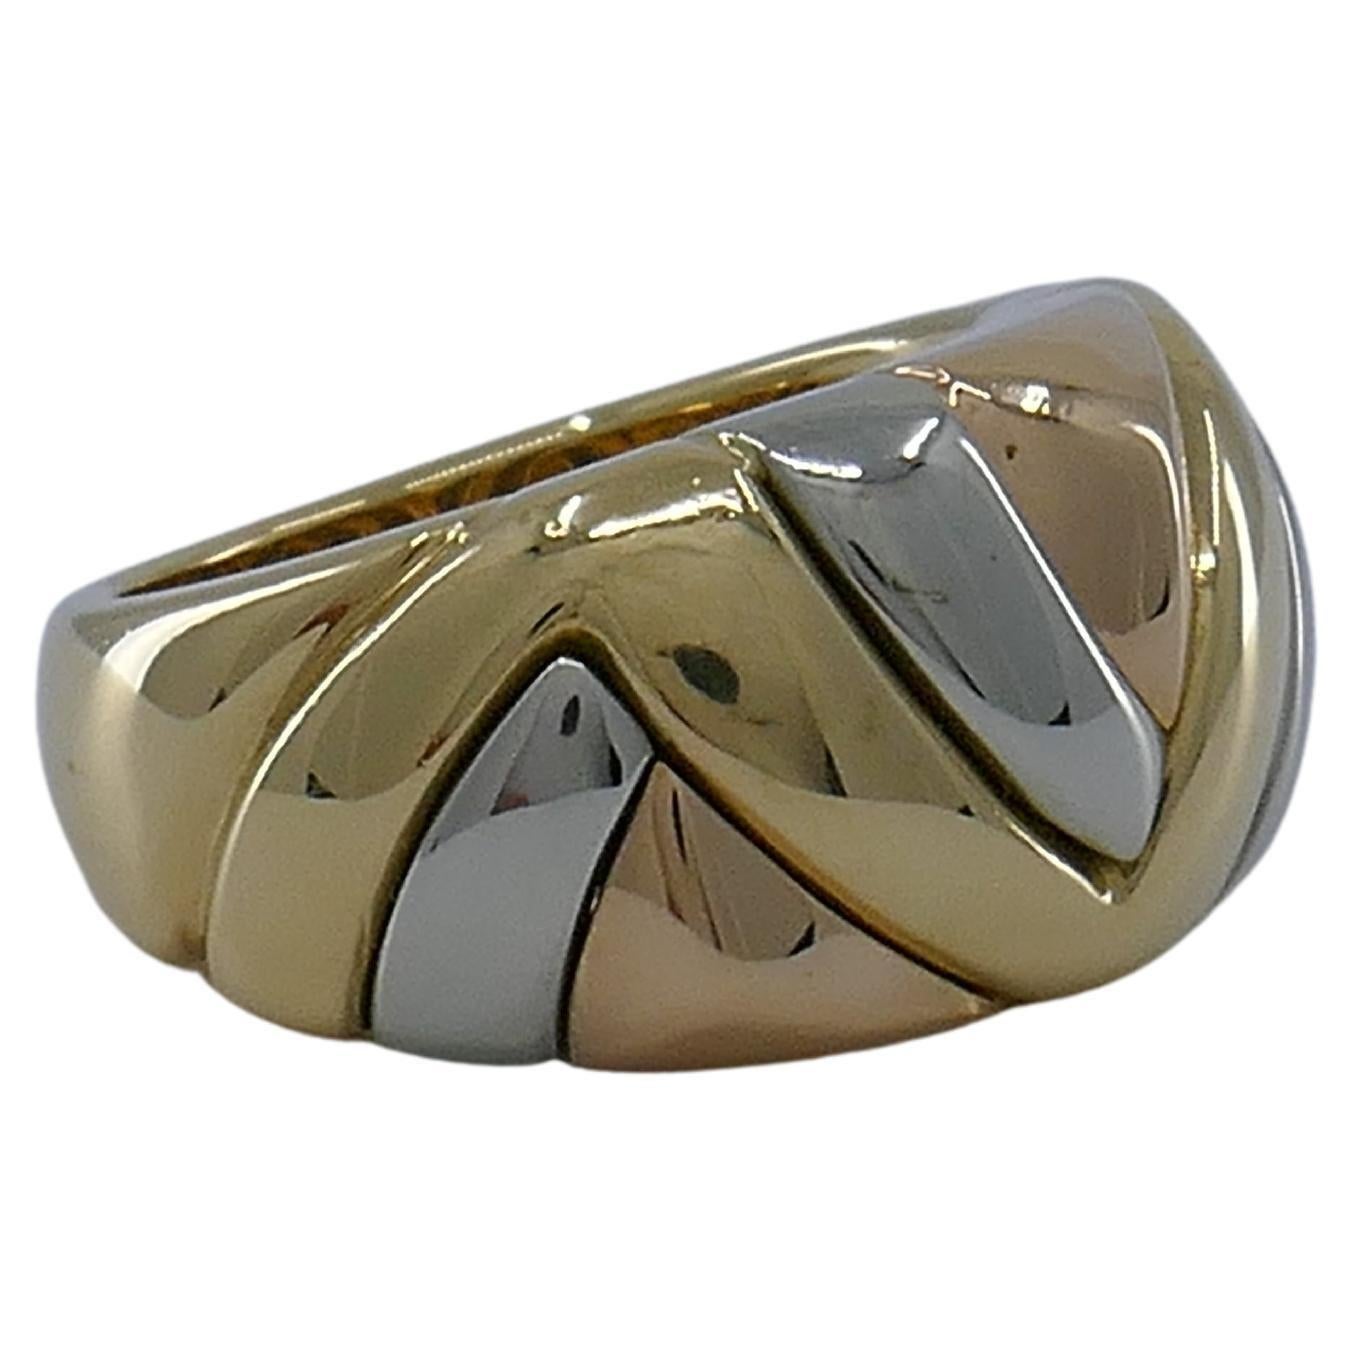 Designed as a dome ring, with the yellow, white and rose gold lines interlacing with each other.
High-polished finish creates the silky smooth curves. The ring appears to be soft and fluid. The dome shape makes it look futuristic.
It’s a great